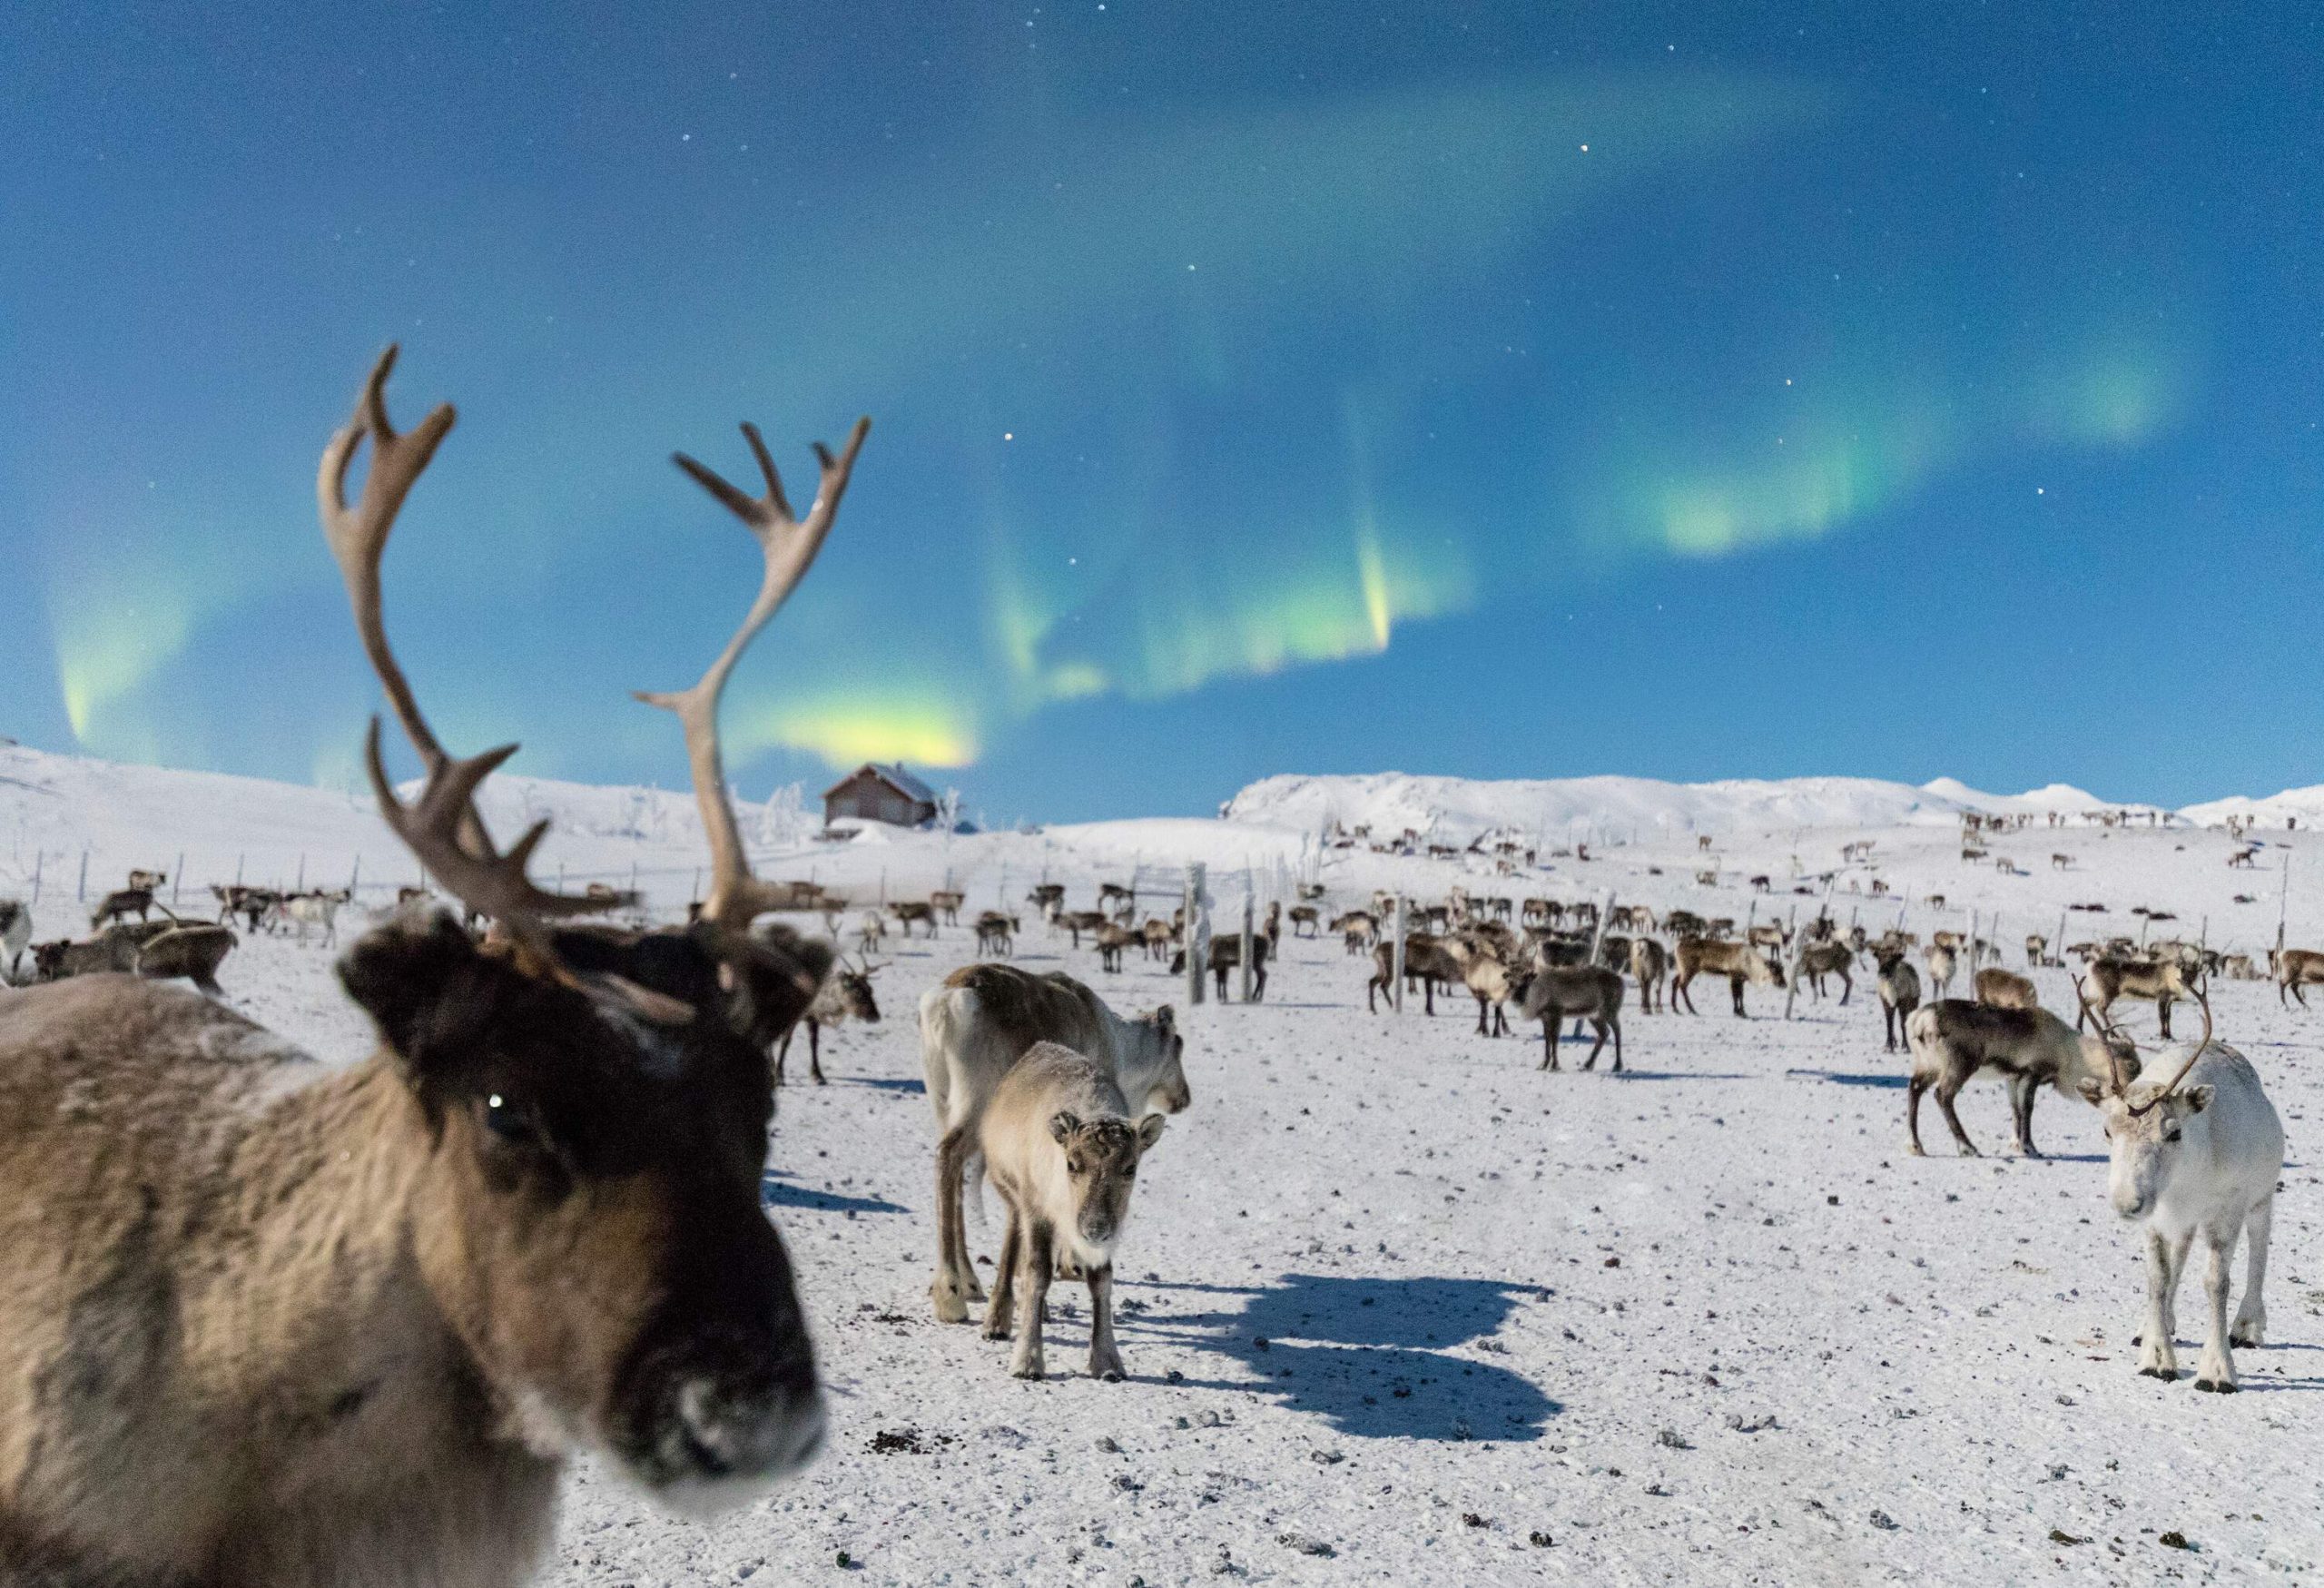 Numerous reindeer on snow-covered land with a single house under the northern lights of the blue sky.